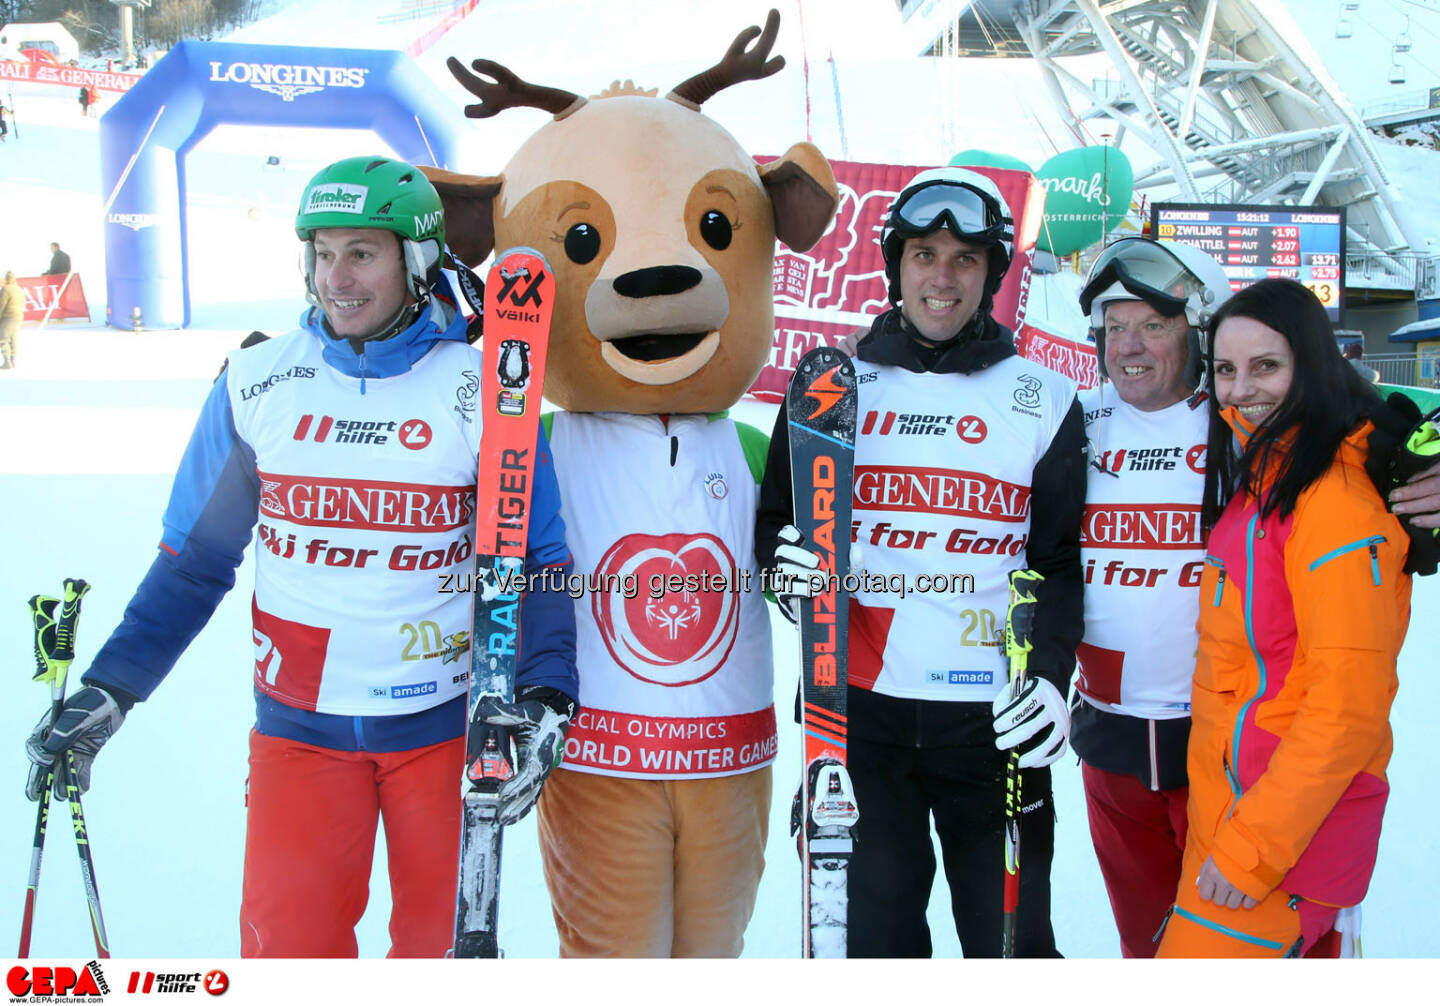 Ski for Gold Charity Race. Image shows Manfred Pranger, mascot Luis, Mario Matt, David Zwilling and Daniela Schuster. Keywords: Special Olympics World Winter Games, SOWWG Austria 2017 preview. Photo: GEPA pictures/ Harald Steiner